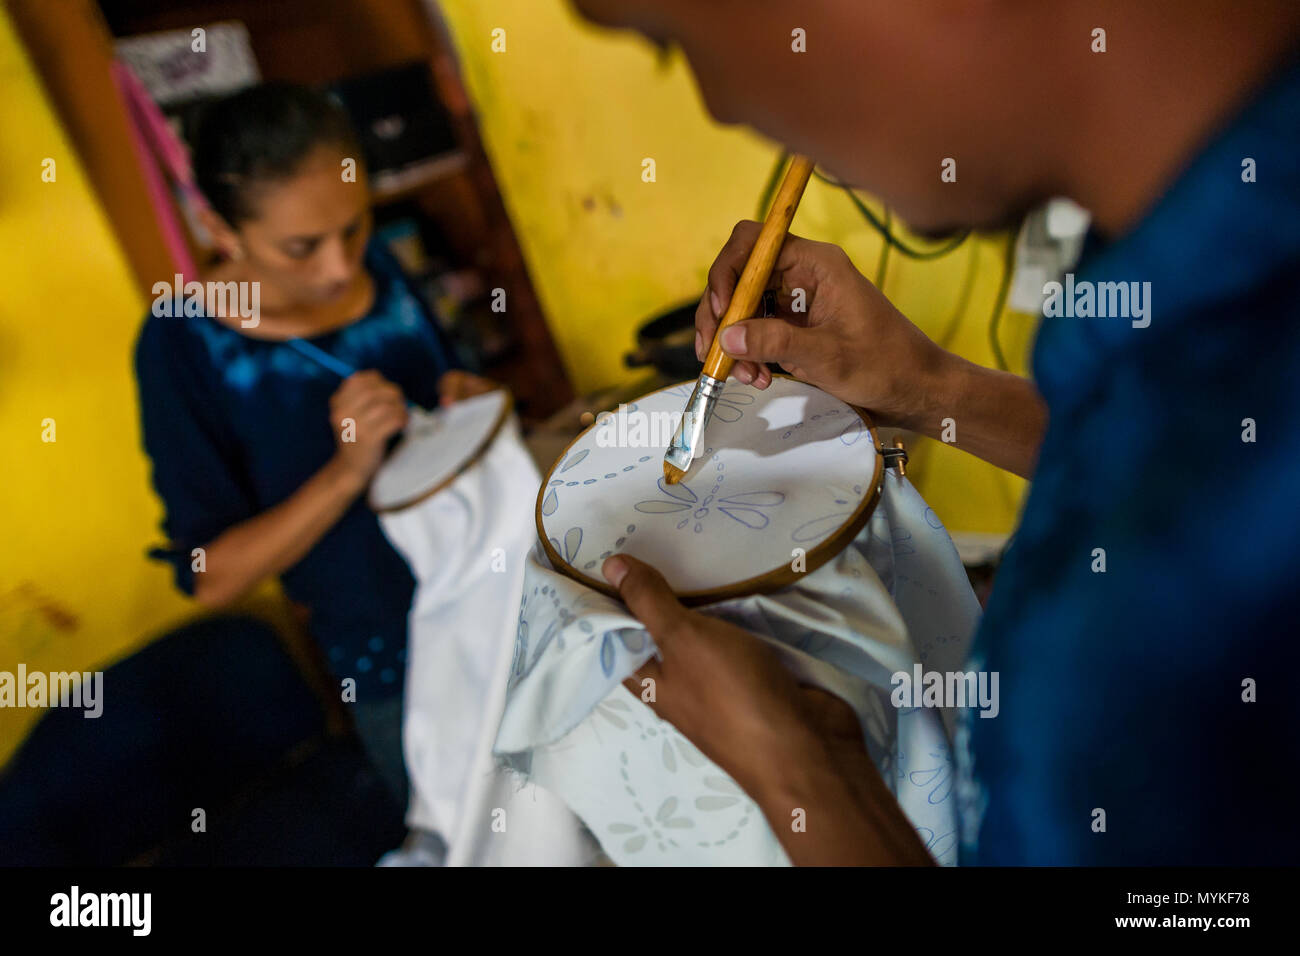 A Salvadoran man draws the wax onto a fabric, dyed with a natural blue indigo afterwards, in a clothing workshop in Santiago Nonualco, El Salvador. Stock Photo